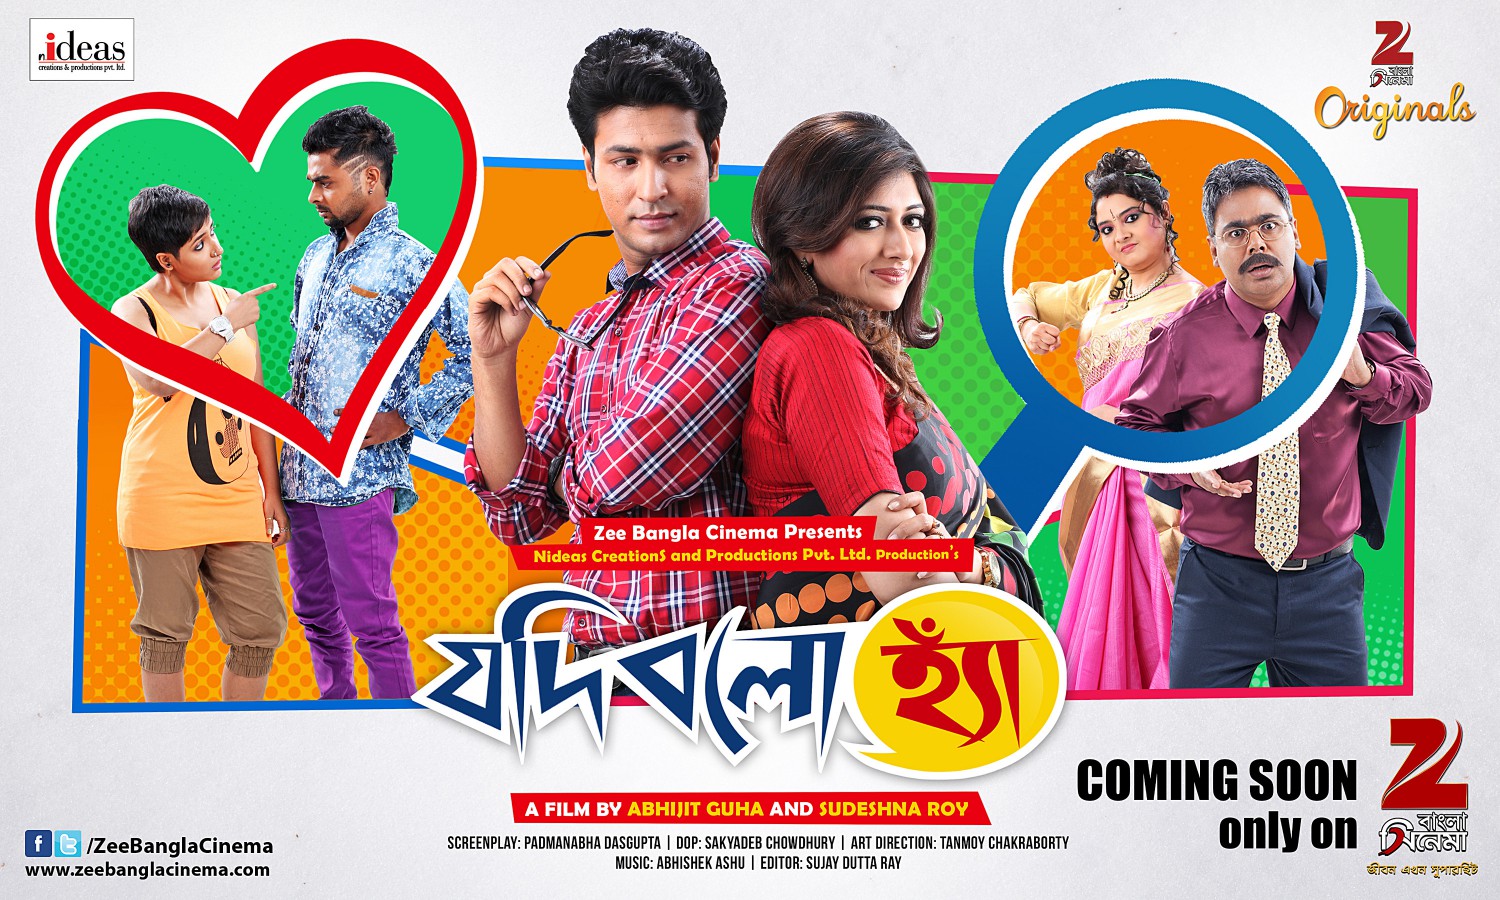 Extra Large TV Poster Image for Jodi Bolo Hyan 